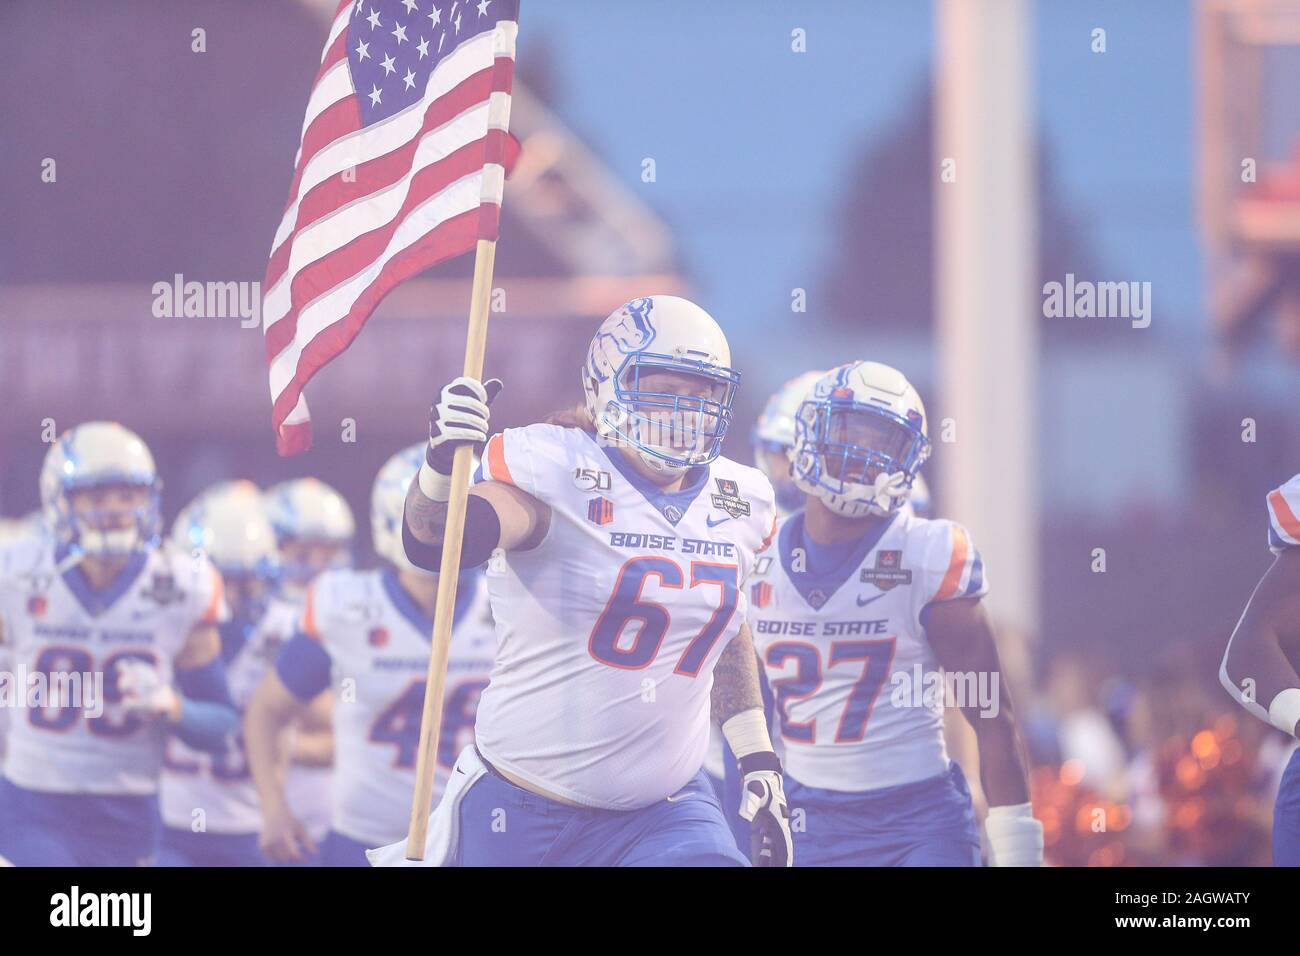 Las Vegas, NV, USA. 21st Dec, 2019. Boise State Broncos offensive lineman Garrett Larson (67) runs on to the field prior to the start of the 28th edition of the Mitsubishi Motors Las Vegas Bowl game featuring the Boise State Broncos and the Washington Huskies at Sam Boyd Stadium in Las Vegas, NV. Christopher Trim/CSM/Alamy Live News Stock Photo